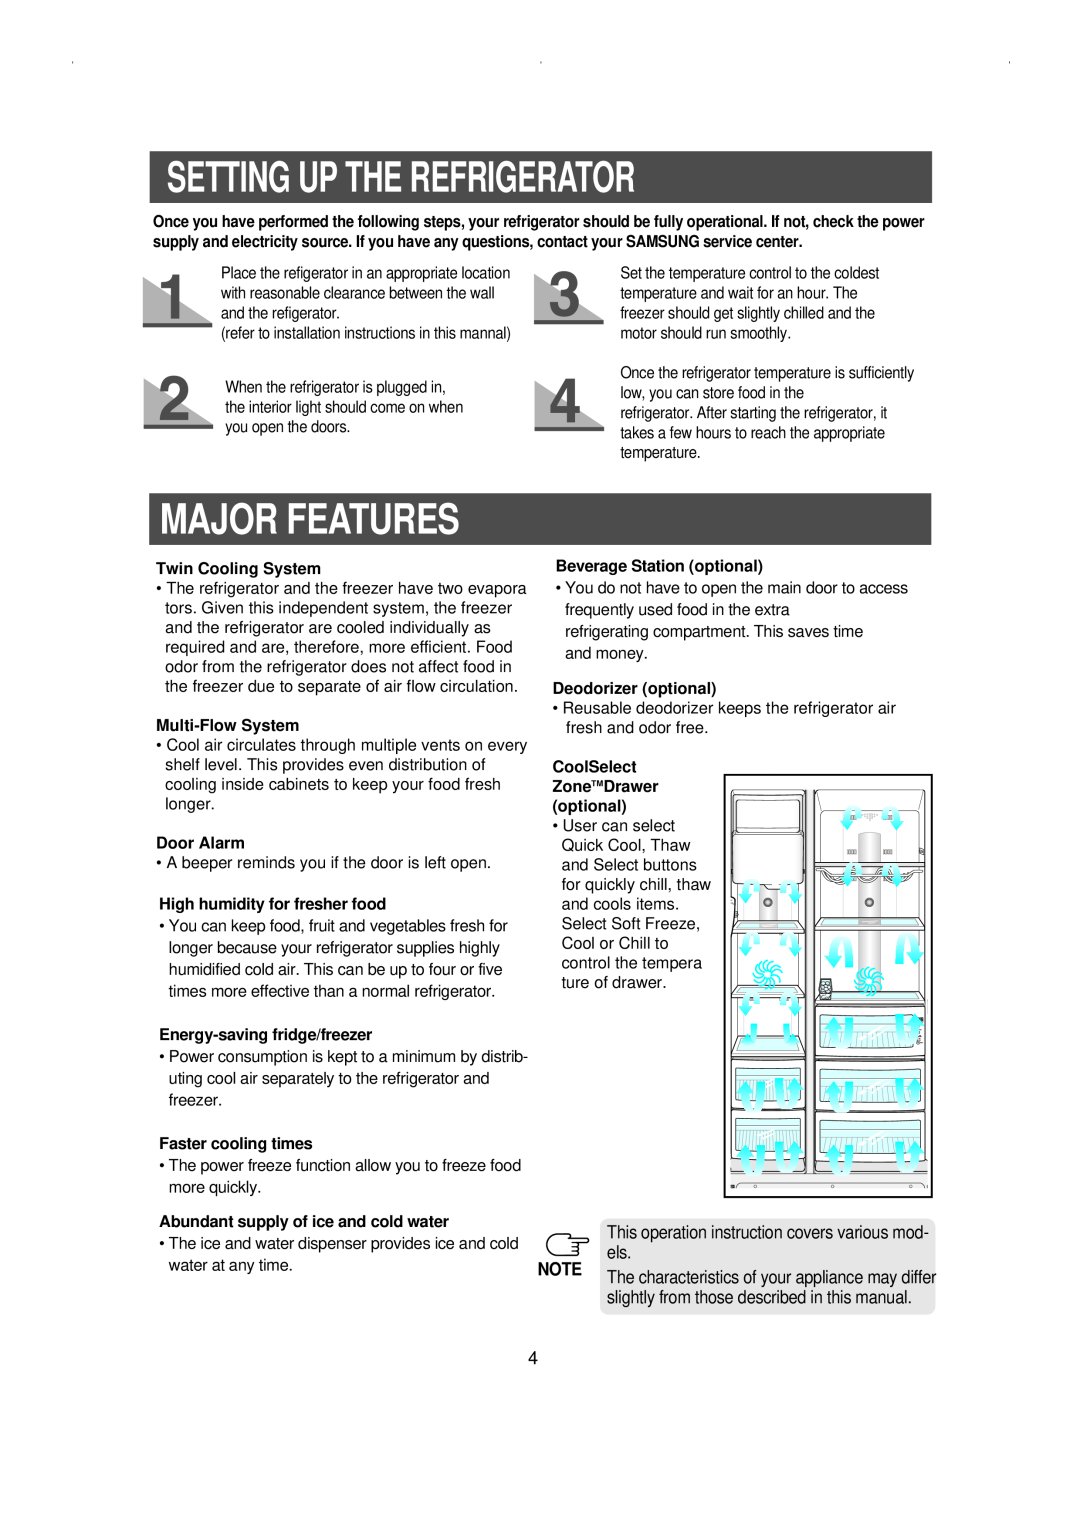 Samsung RS23KCSW owner manual Setting Up The Refrigerator, Major Features 